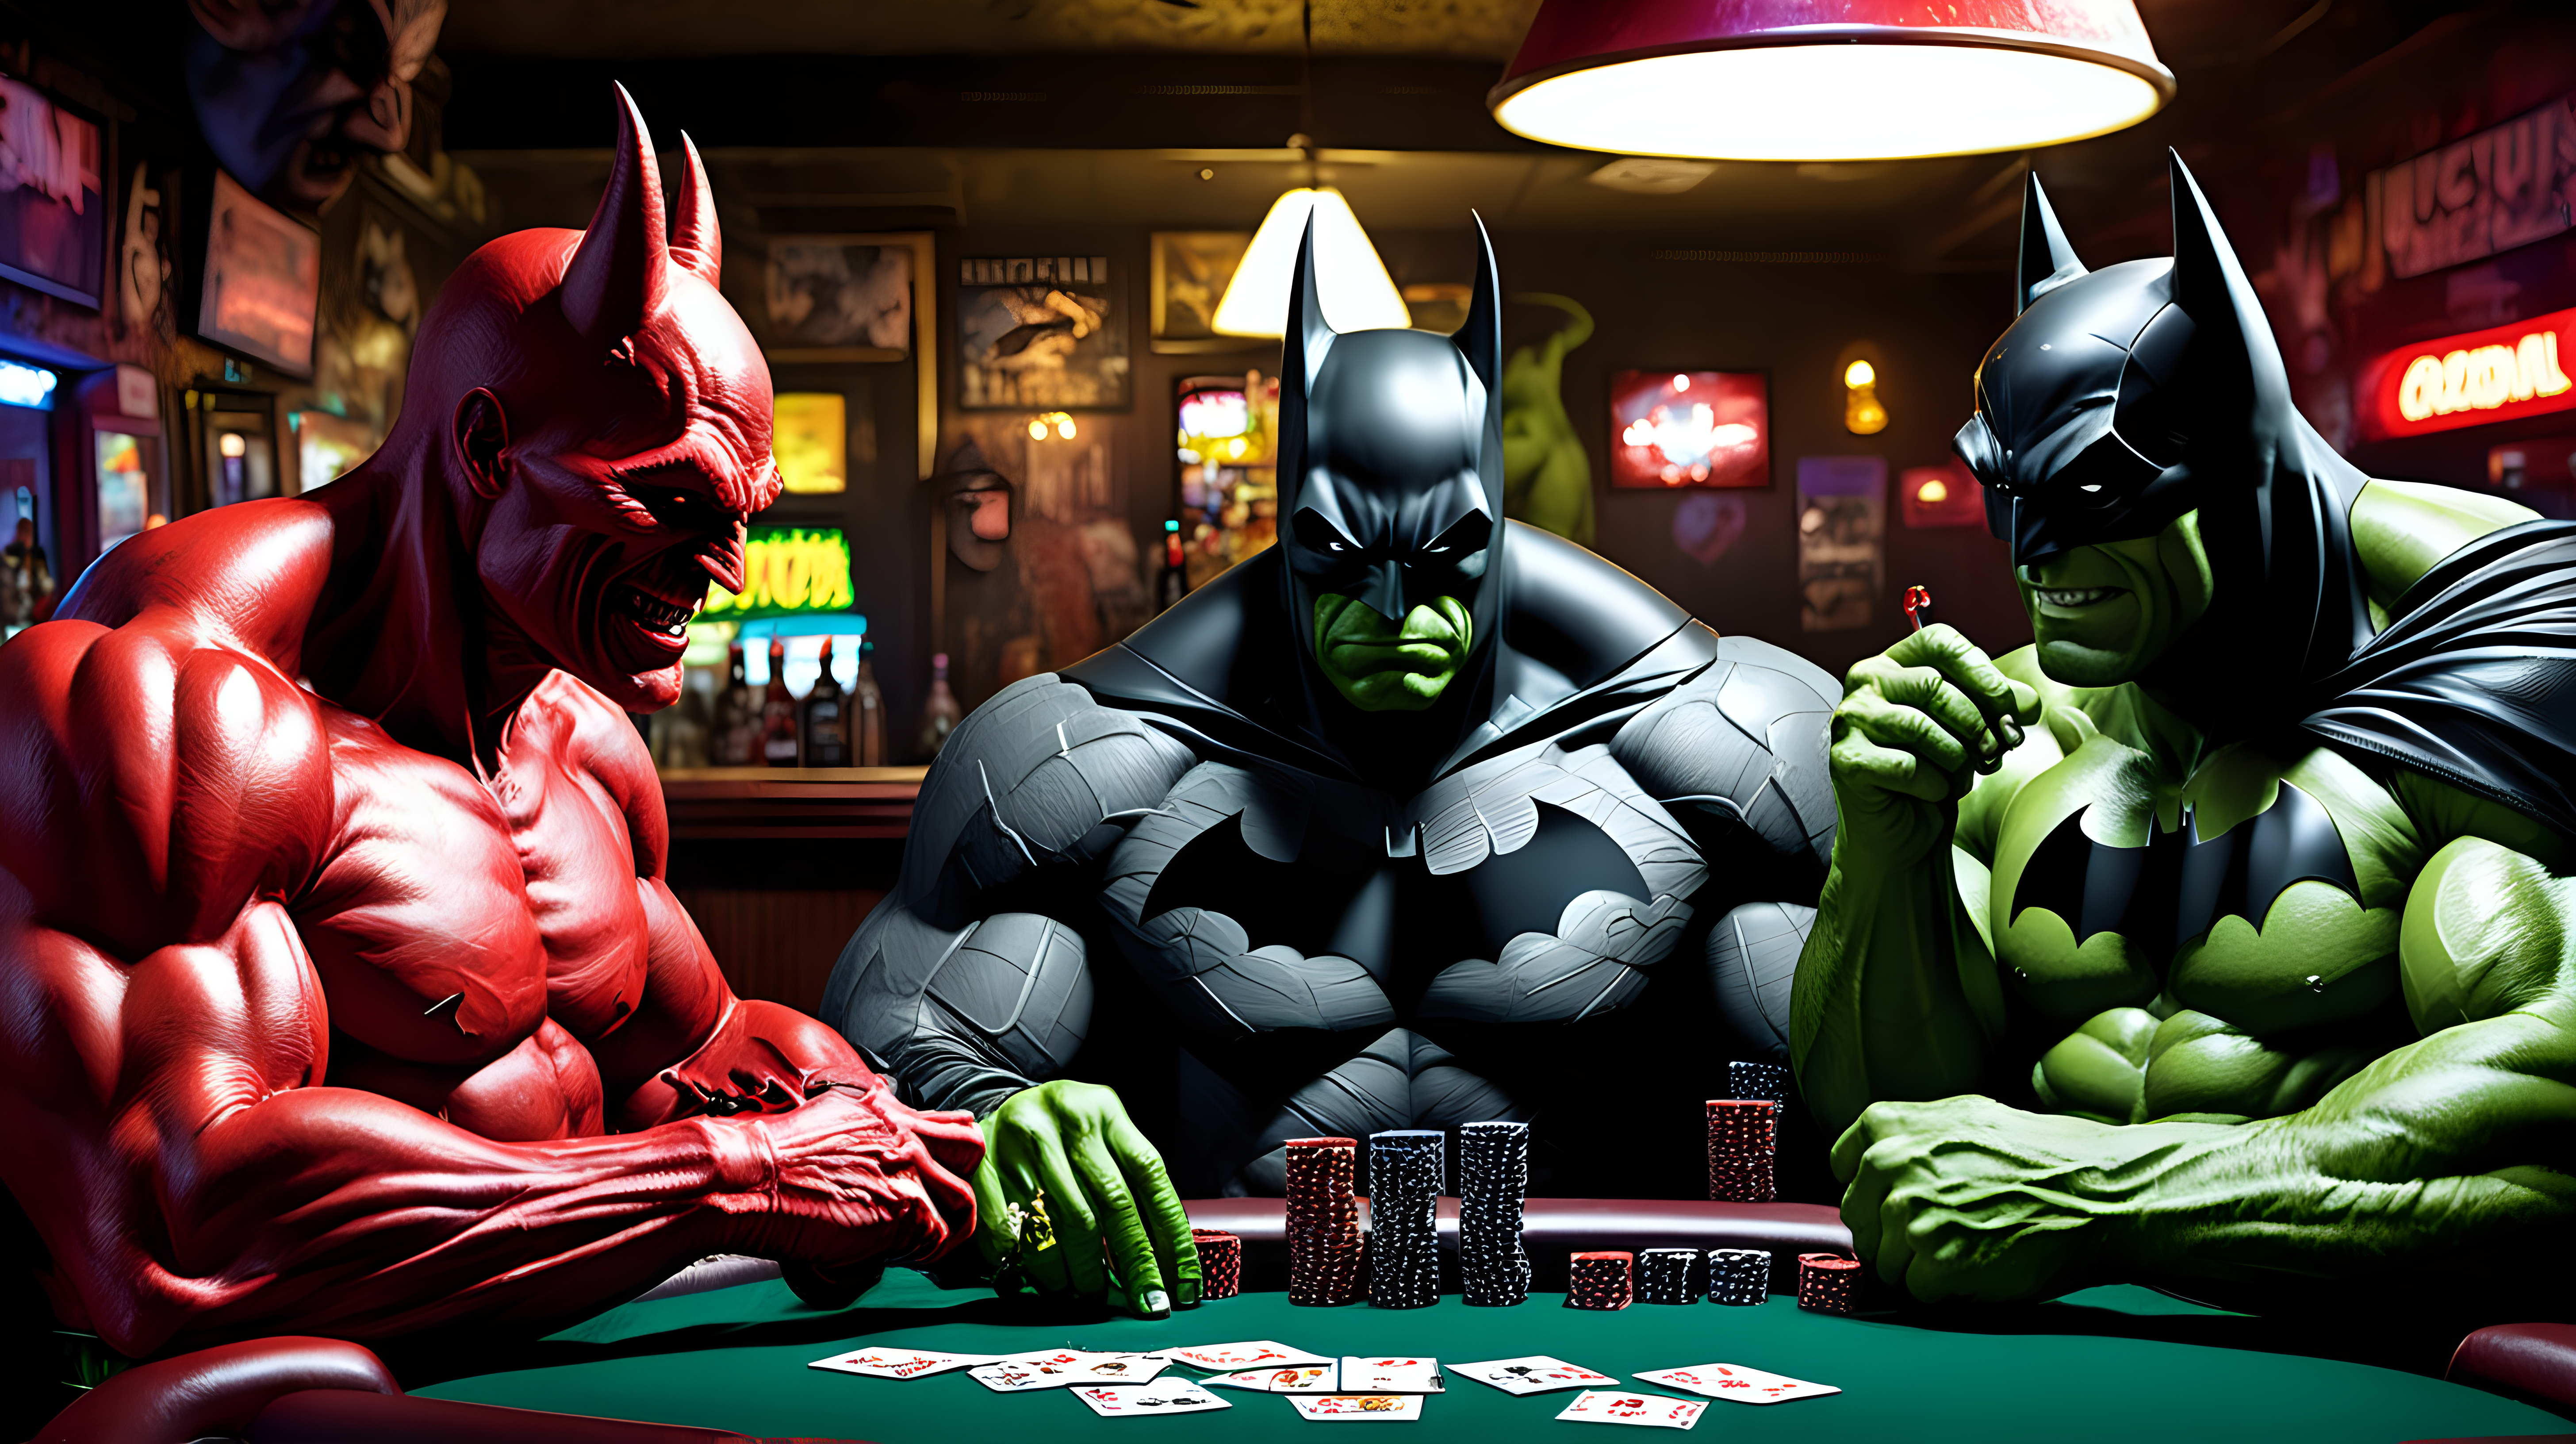 The Devil The Batman and Hulk playing poker and having drinks in a dive bar